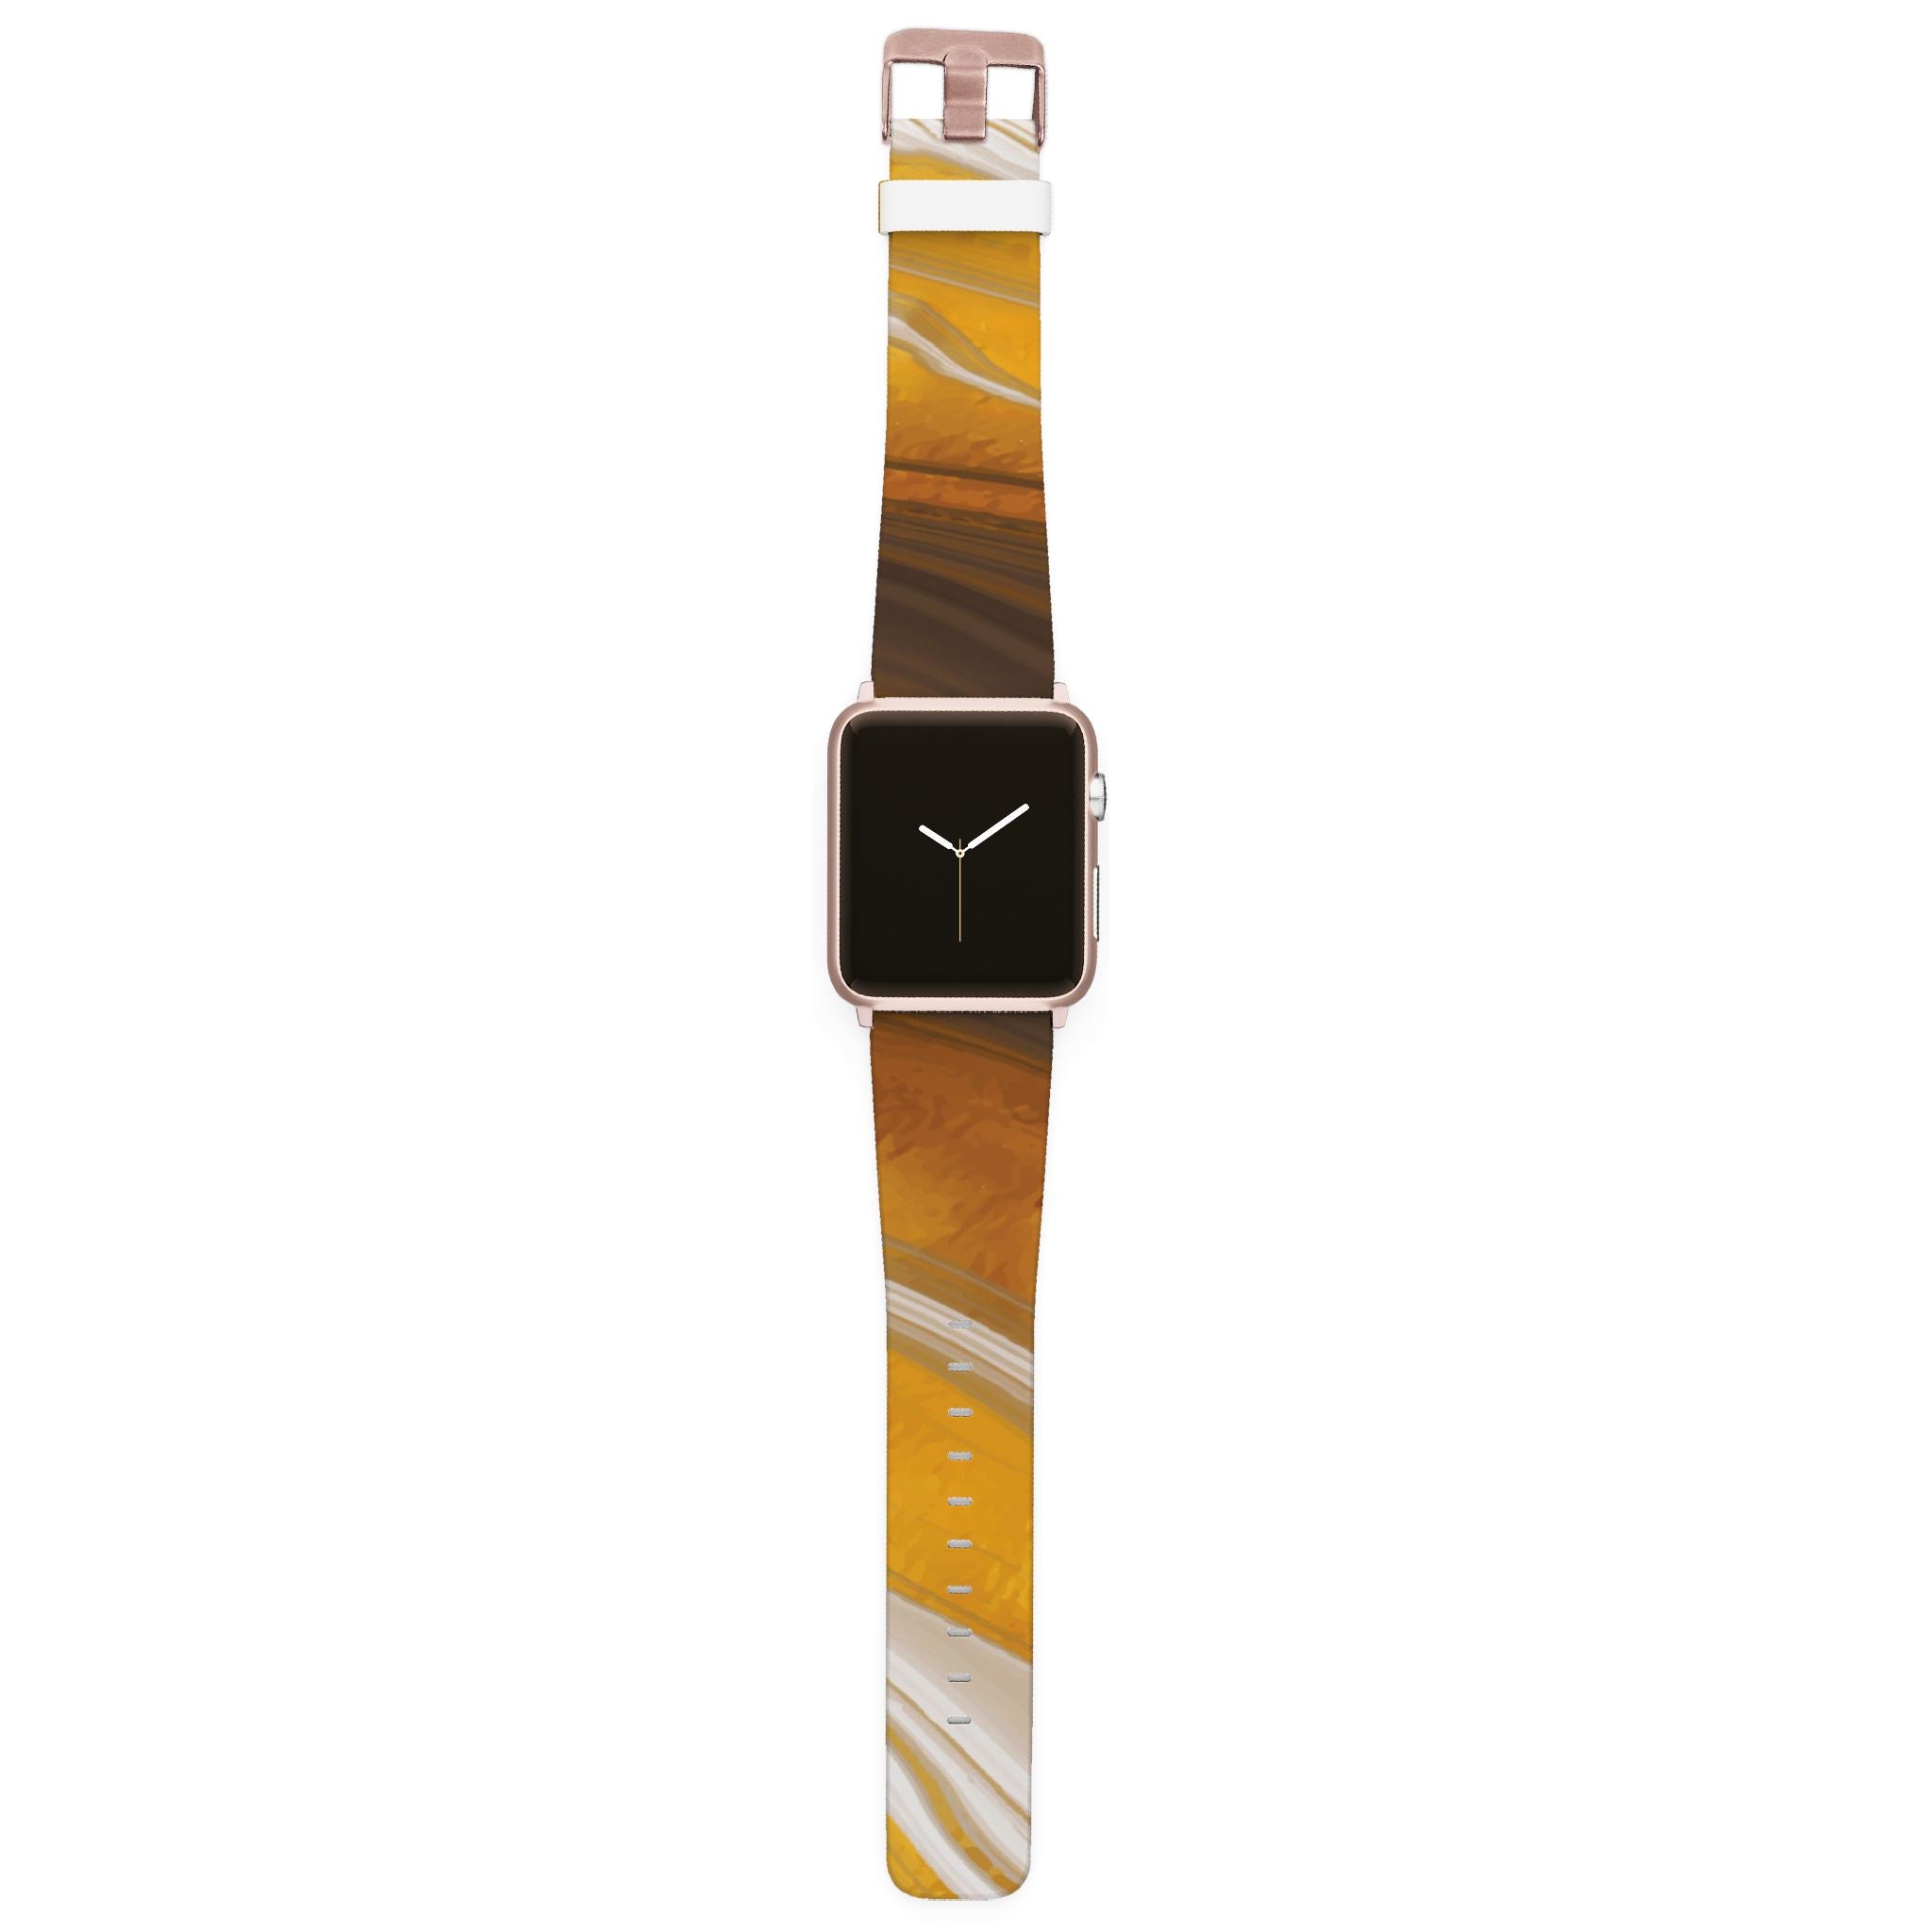 Resin Apple Watch Band Apple Watch Band C4 BELTS